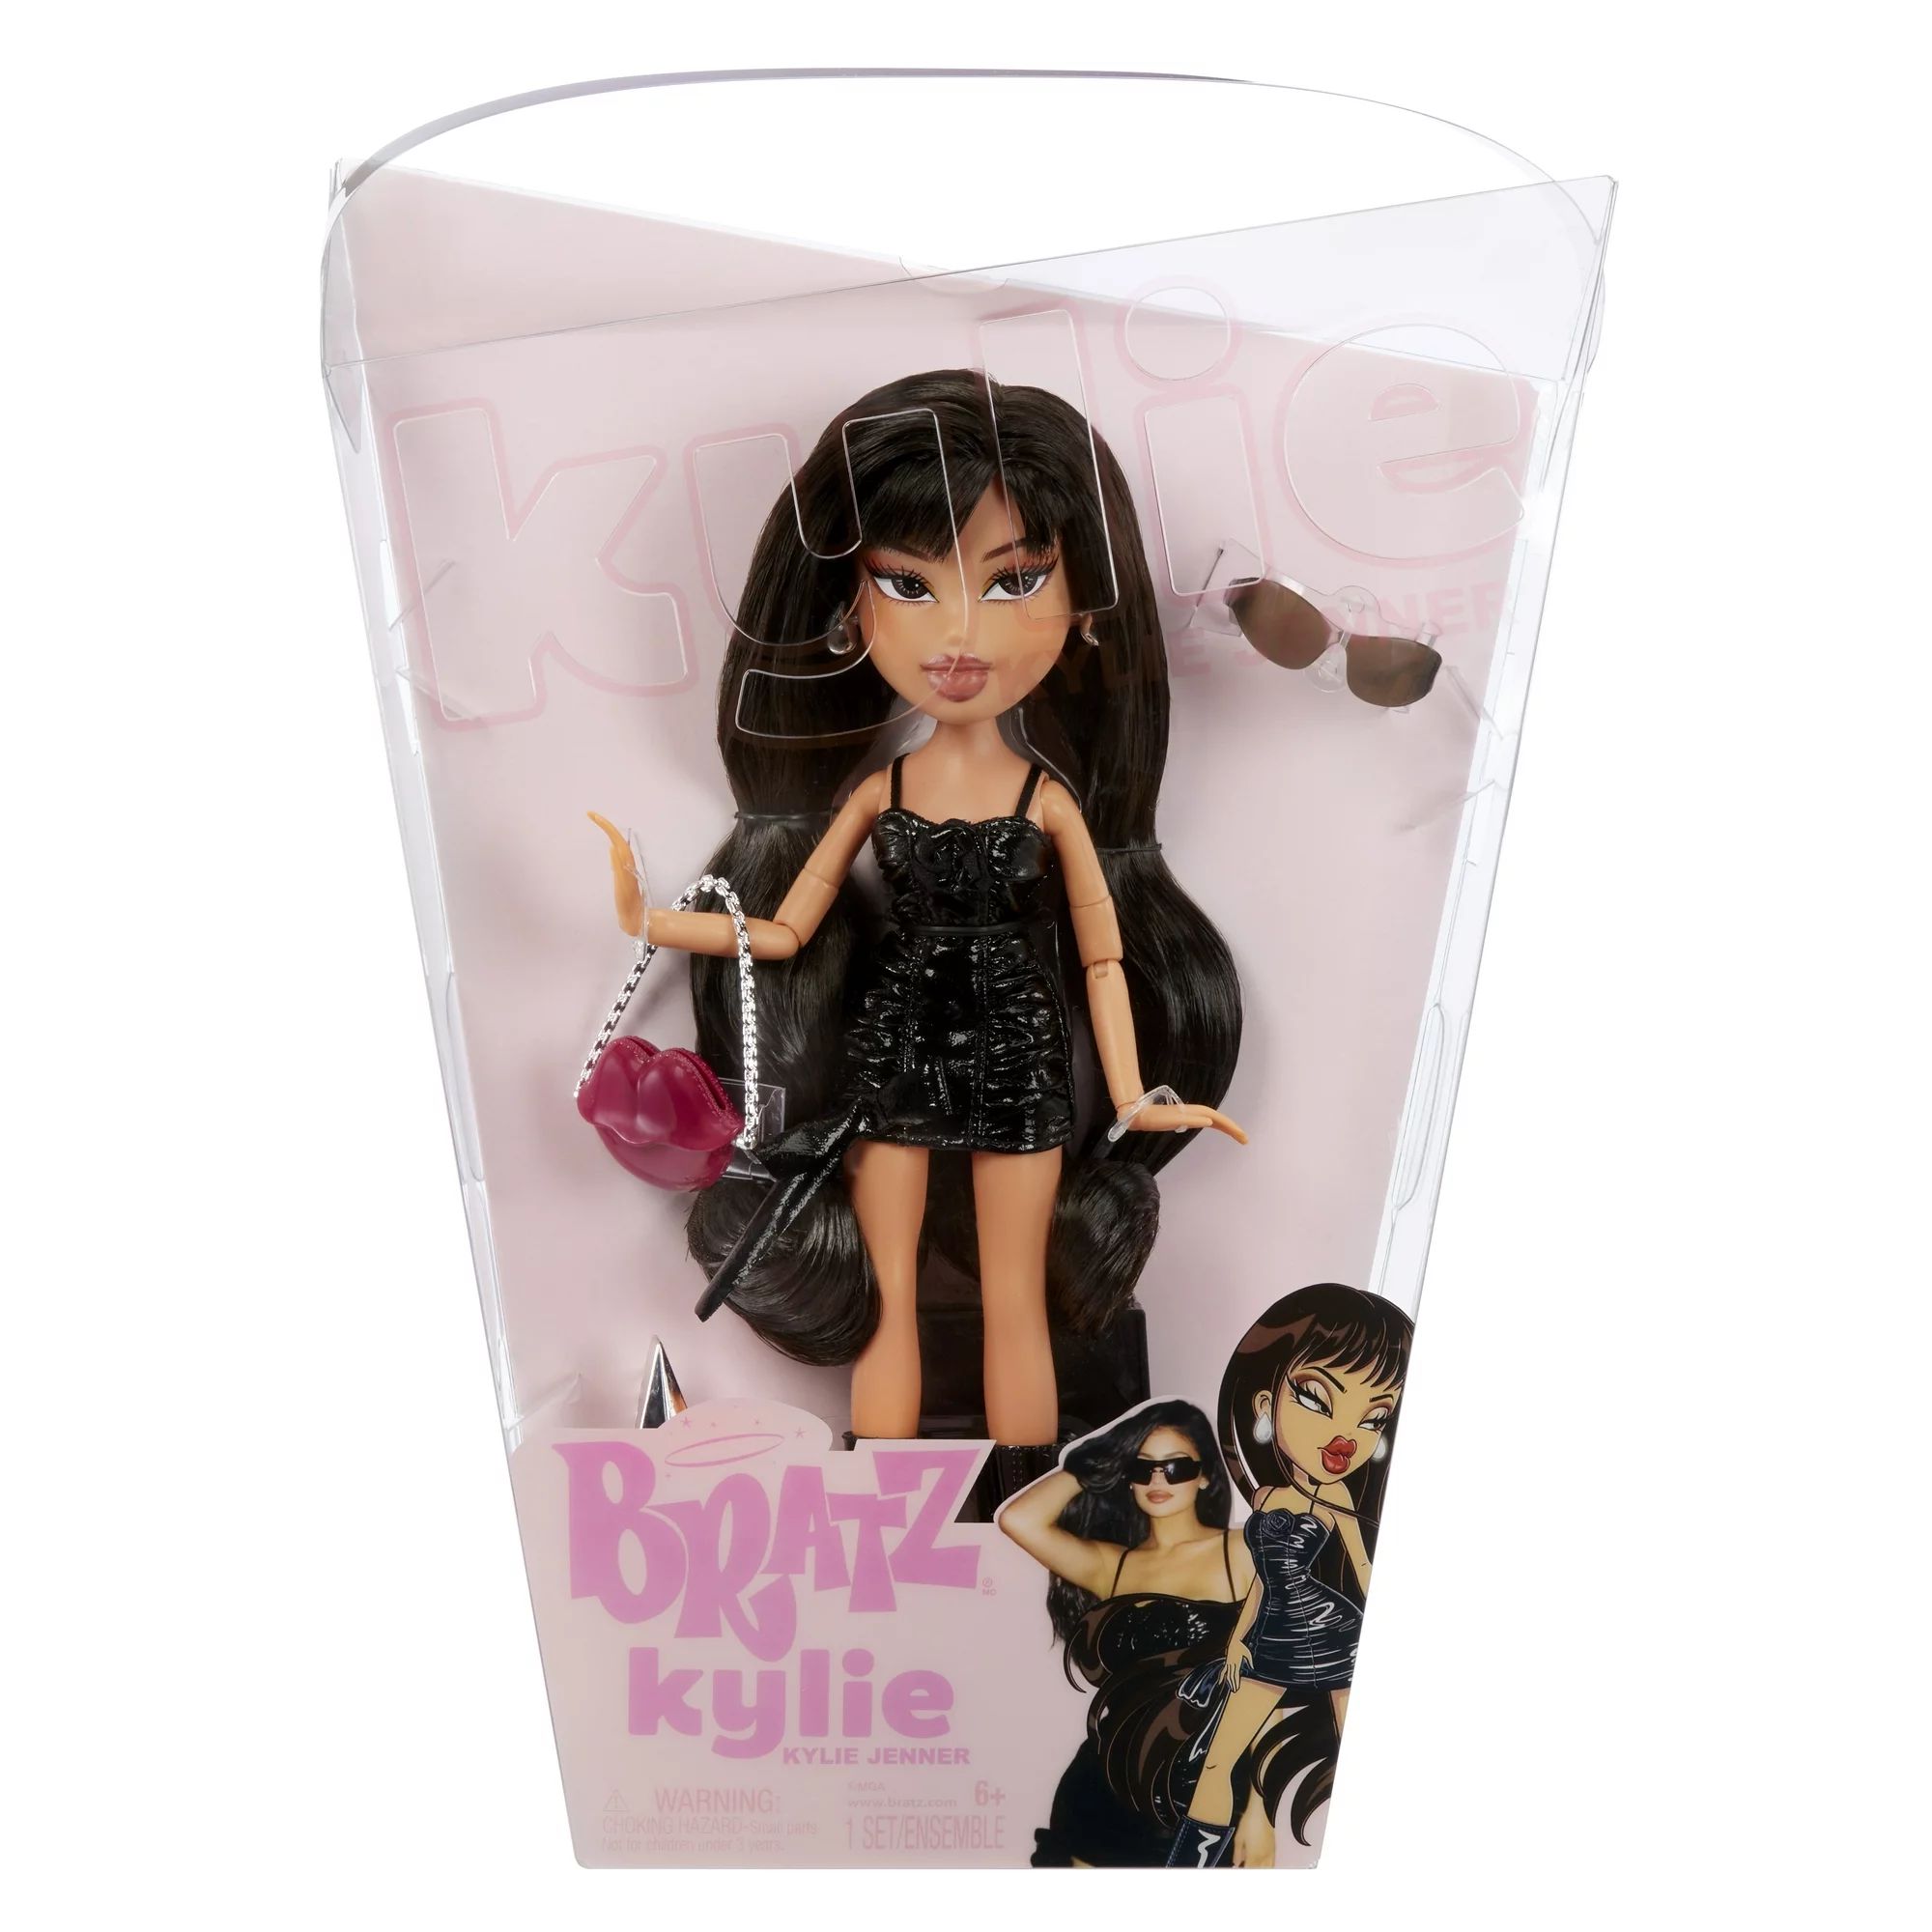 Bratz x Kylie Jenner Day Fashion Doll with Accessories and Poster | Walmart (US)